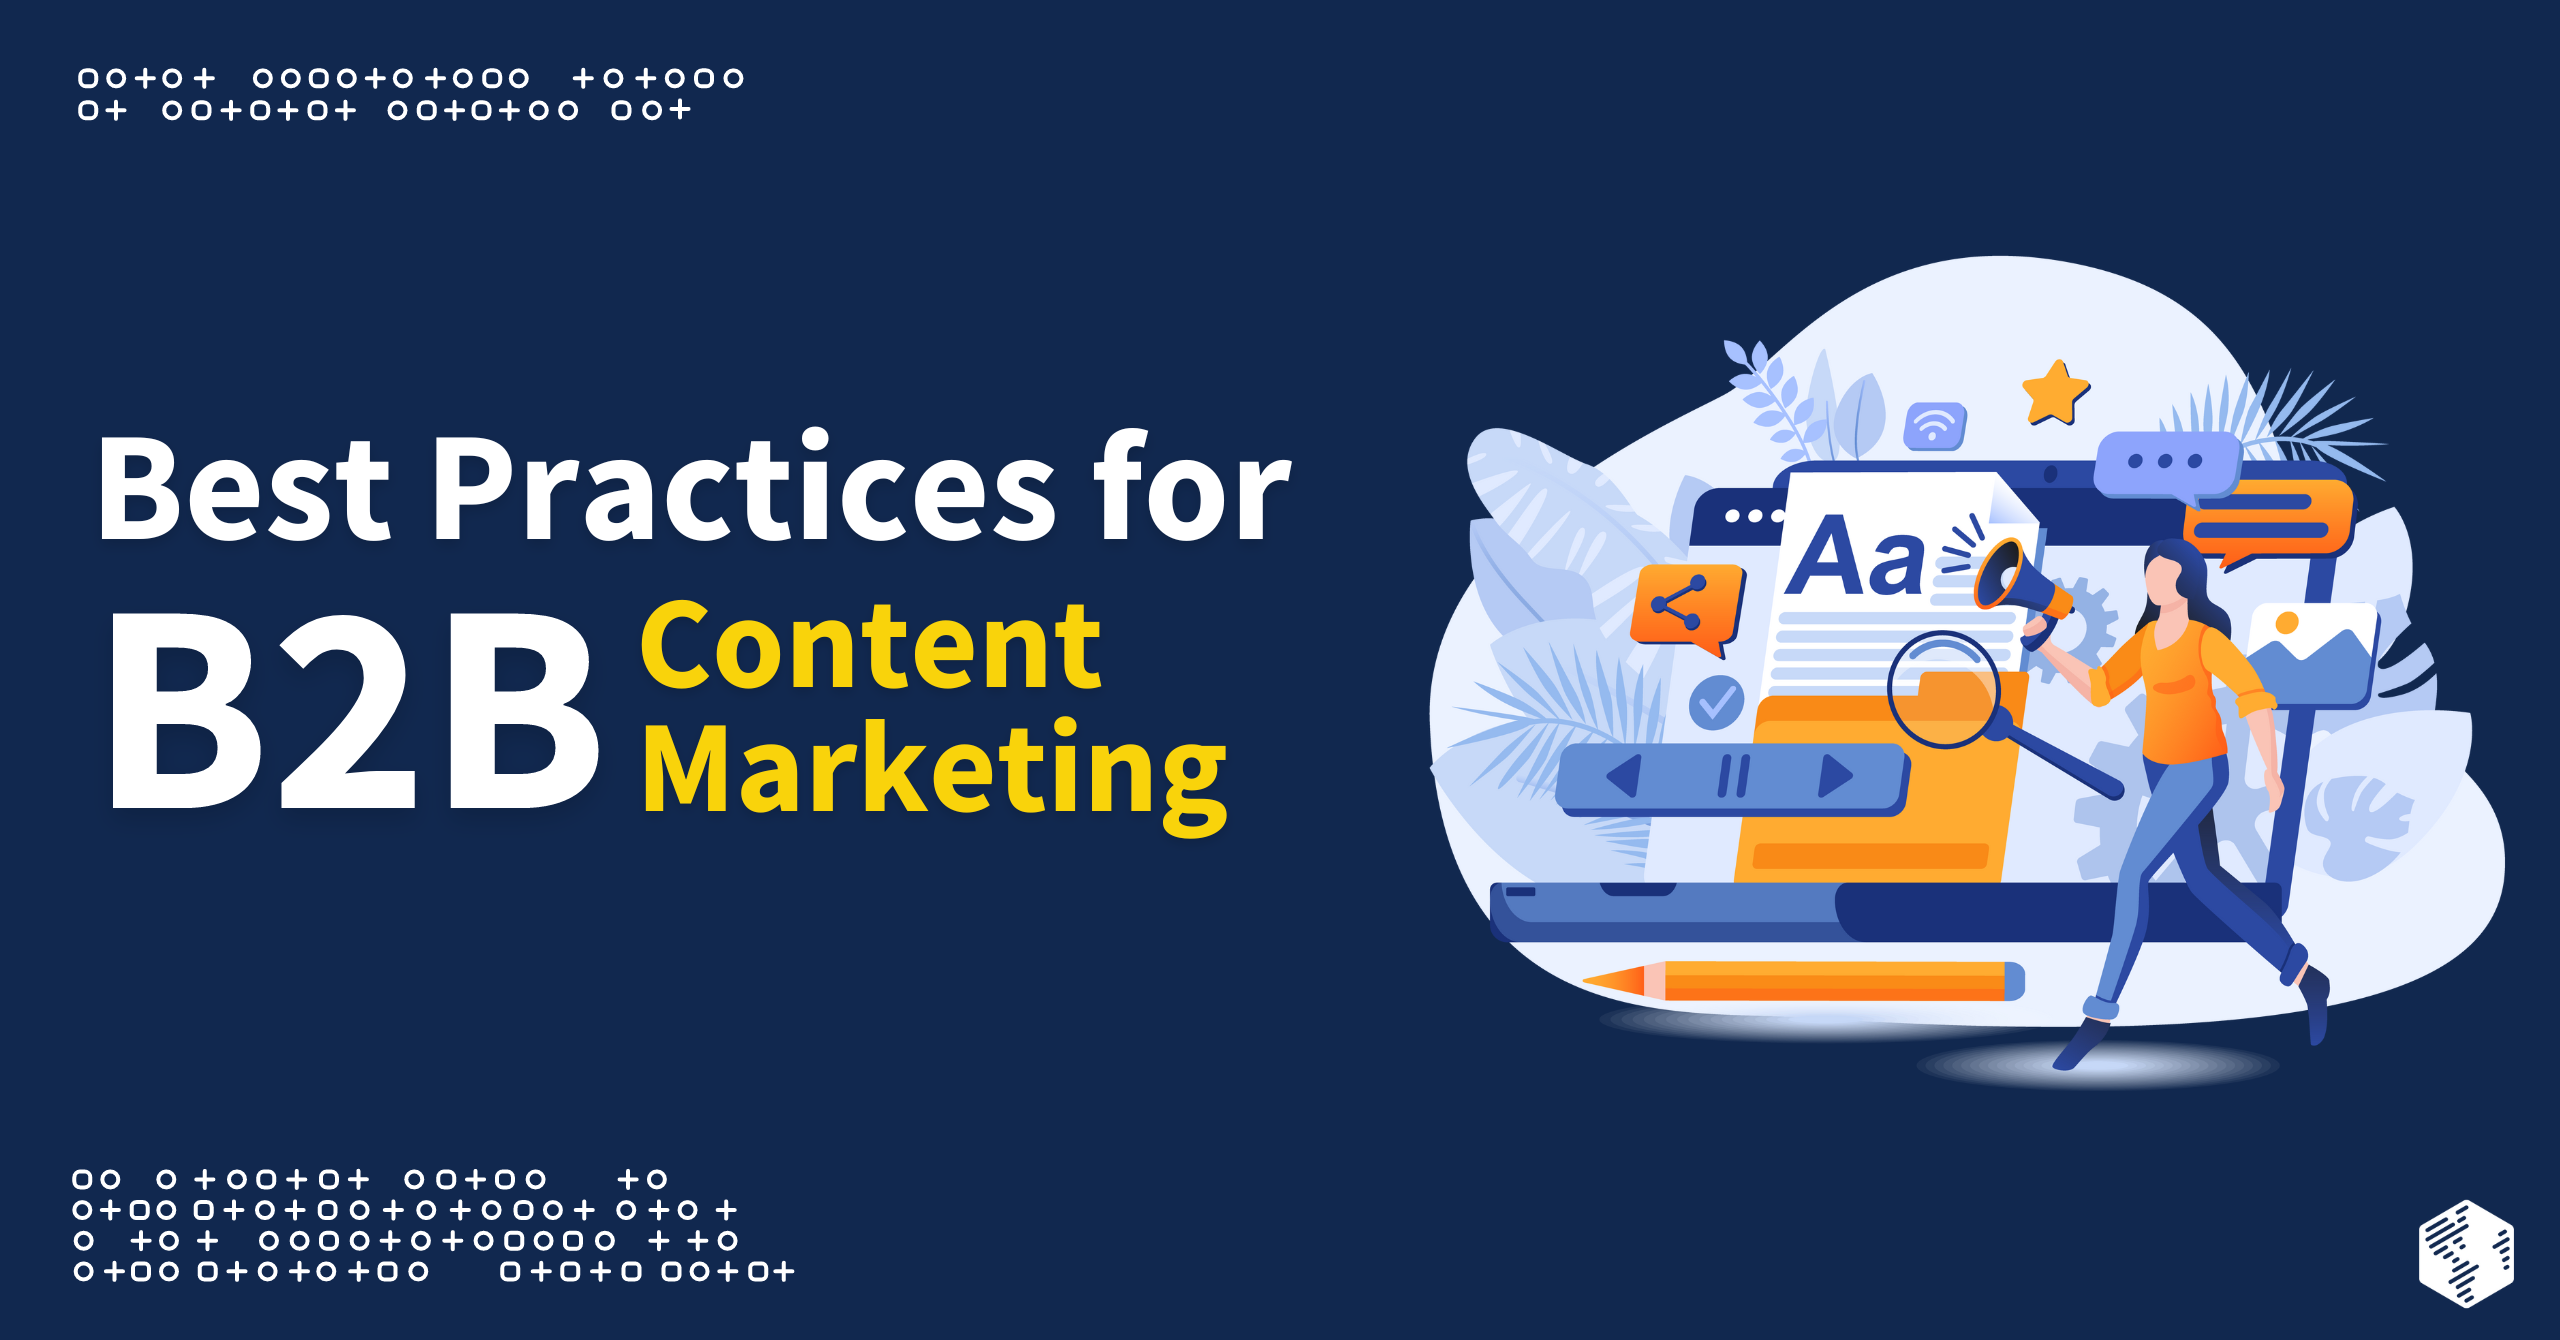 Best Practices for B2B Content Marketing